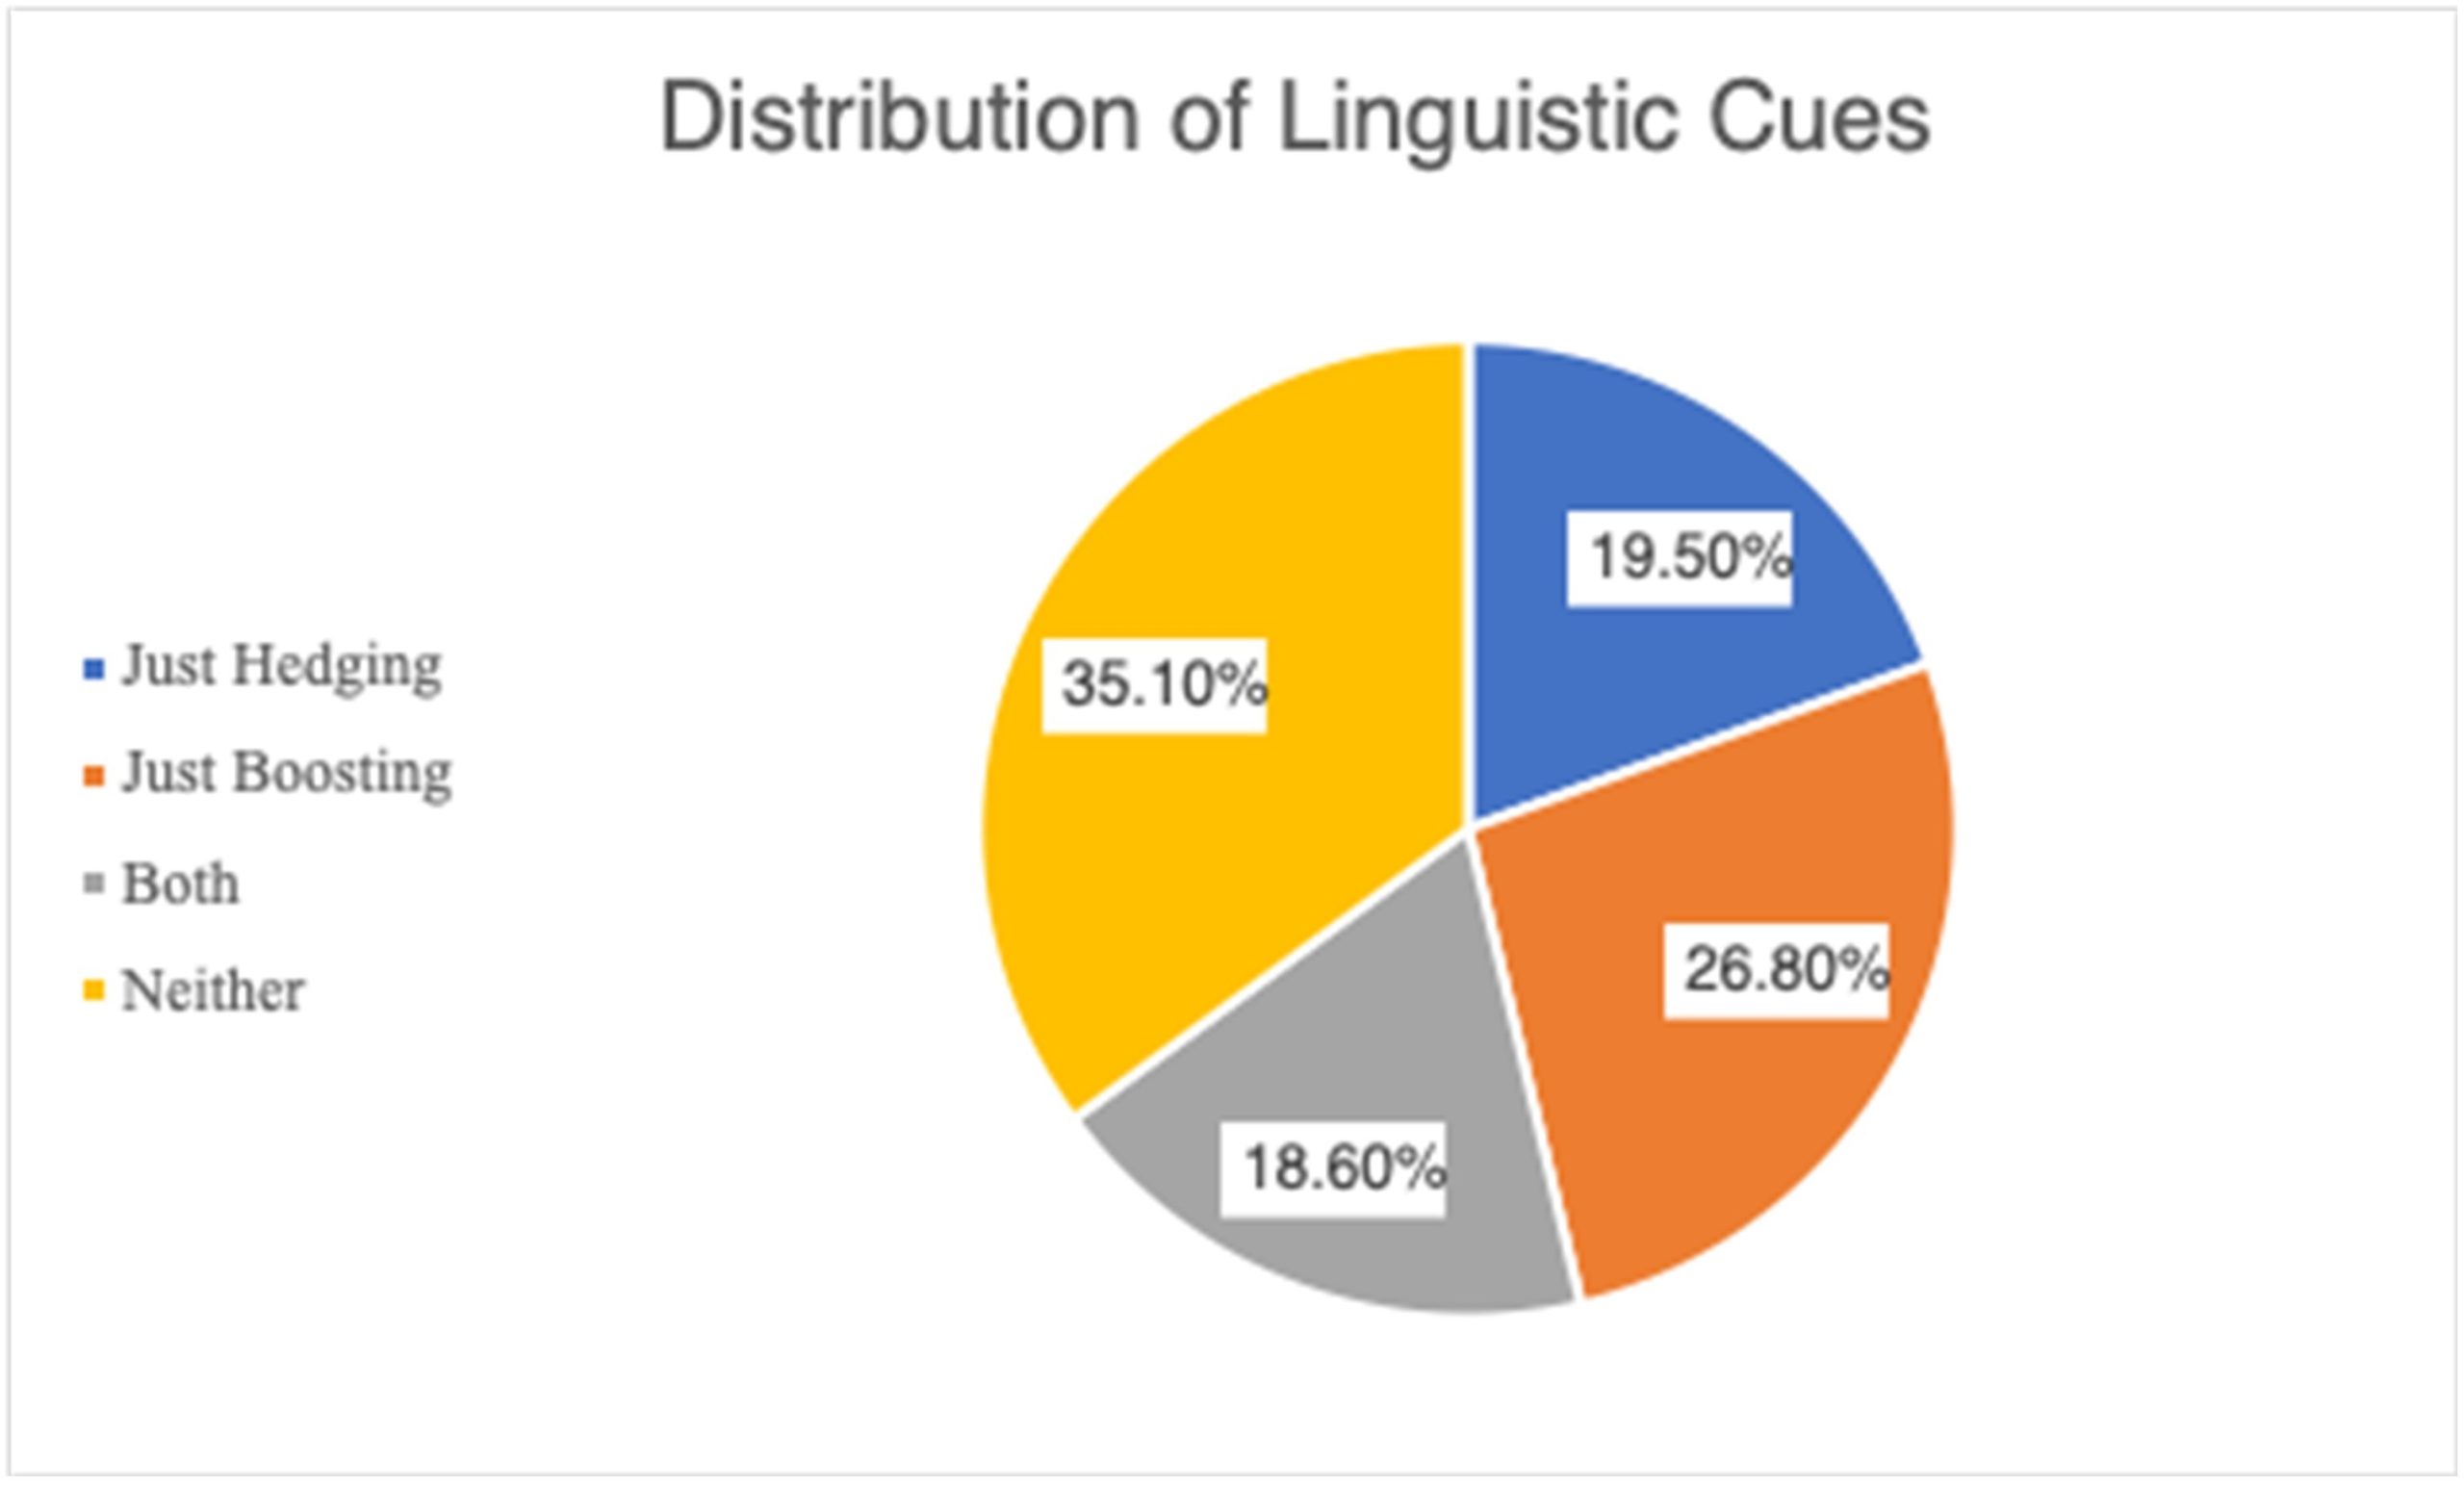 Pie chart showing distribution of linguistic cues including hedging (19.5%), boosting (27%), mixed cues (18.6%), and no cues (35%).